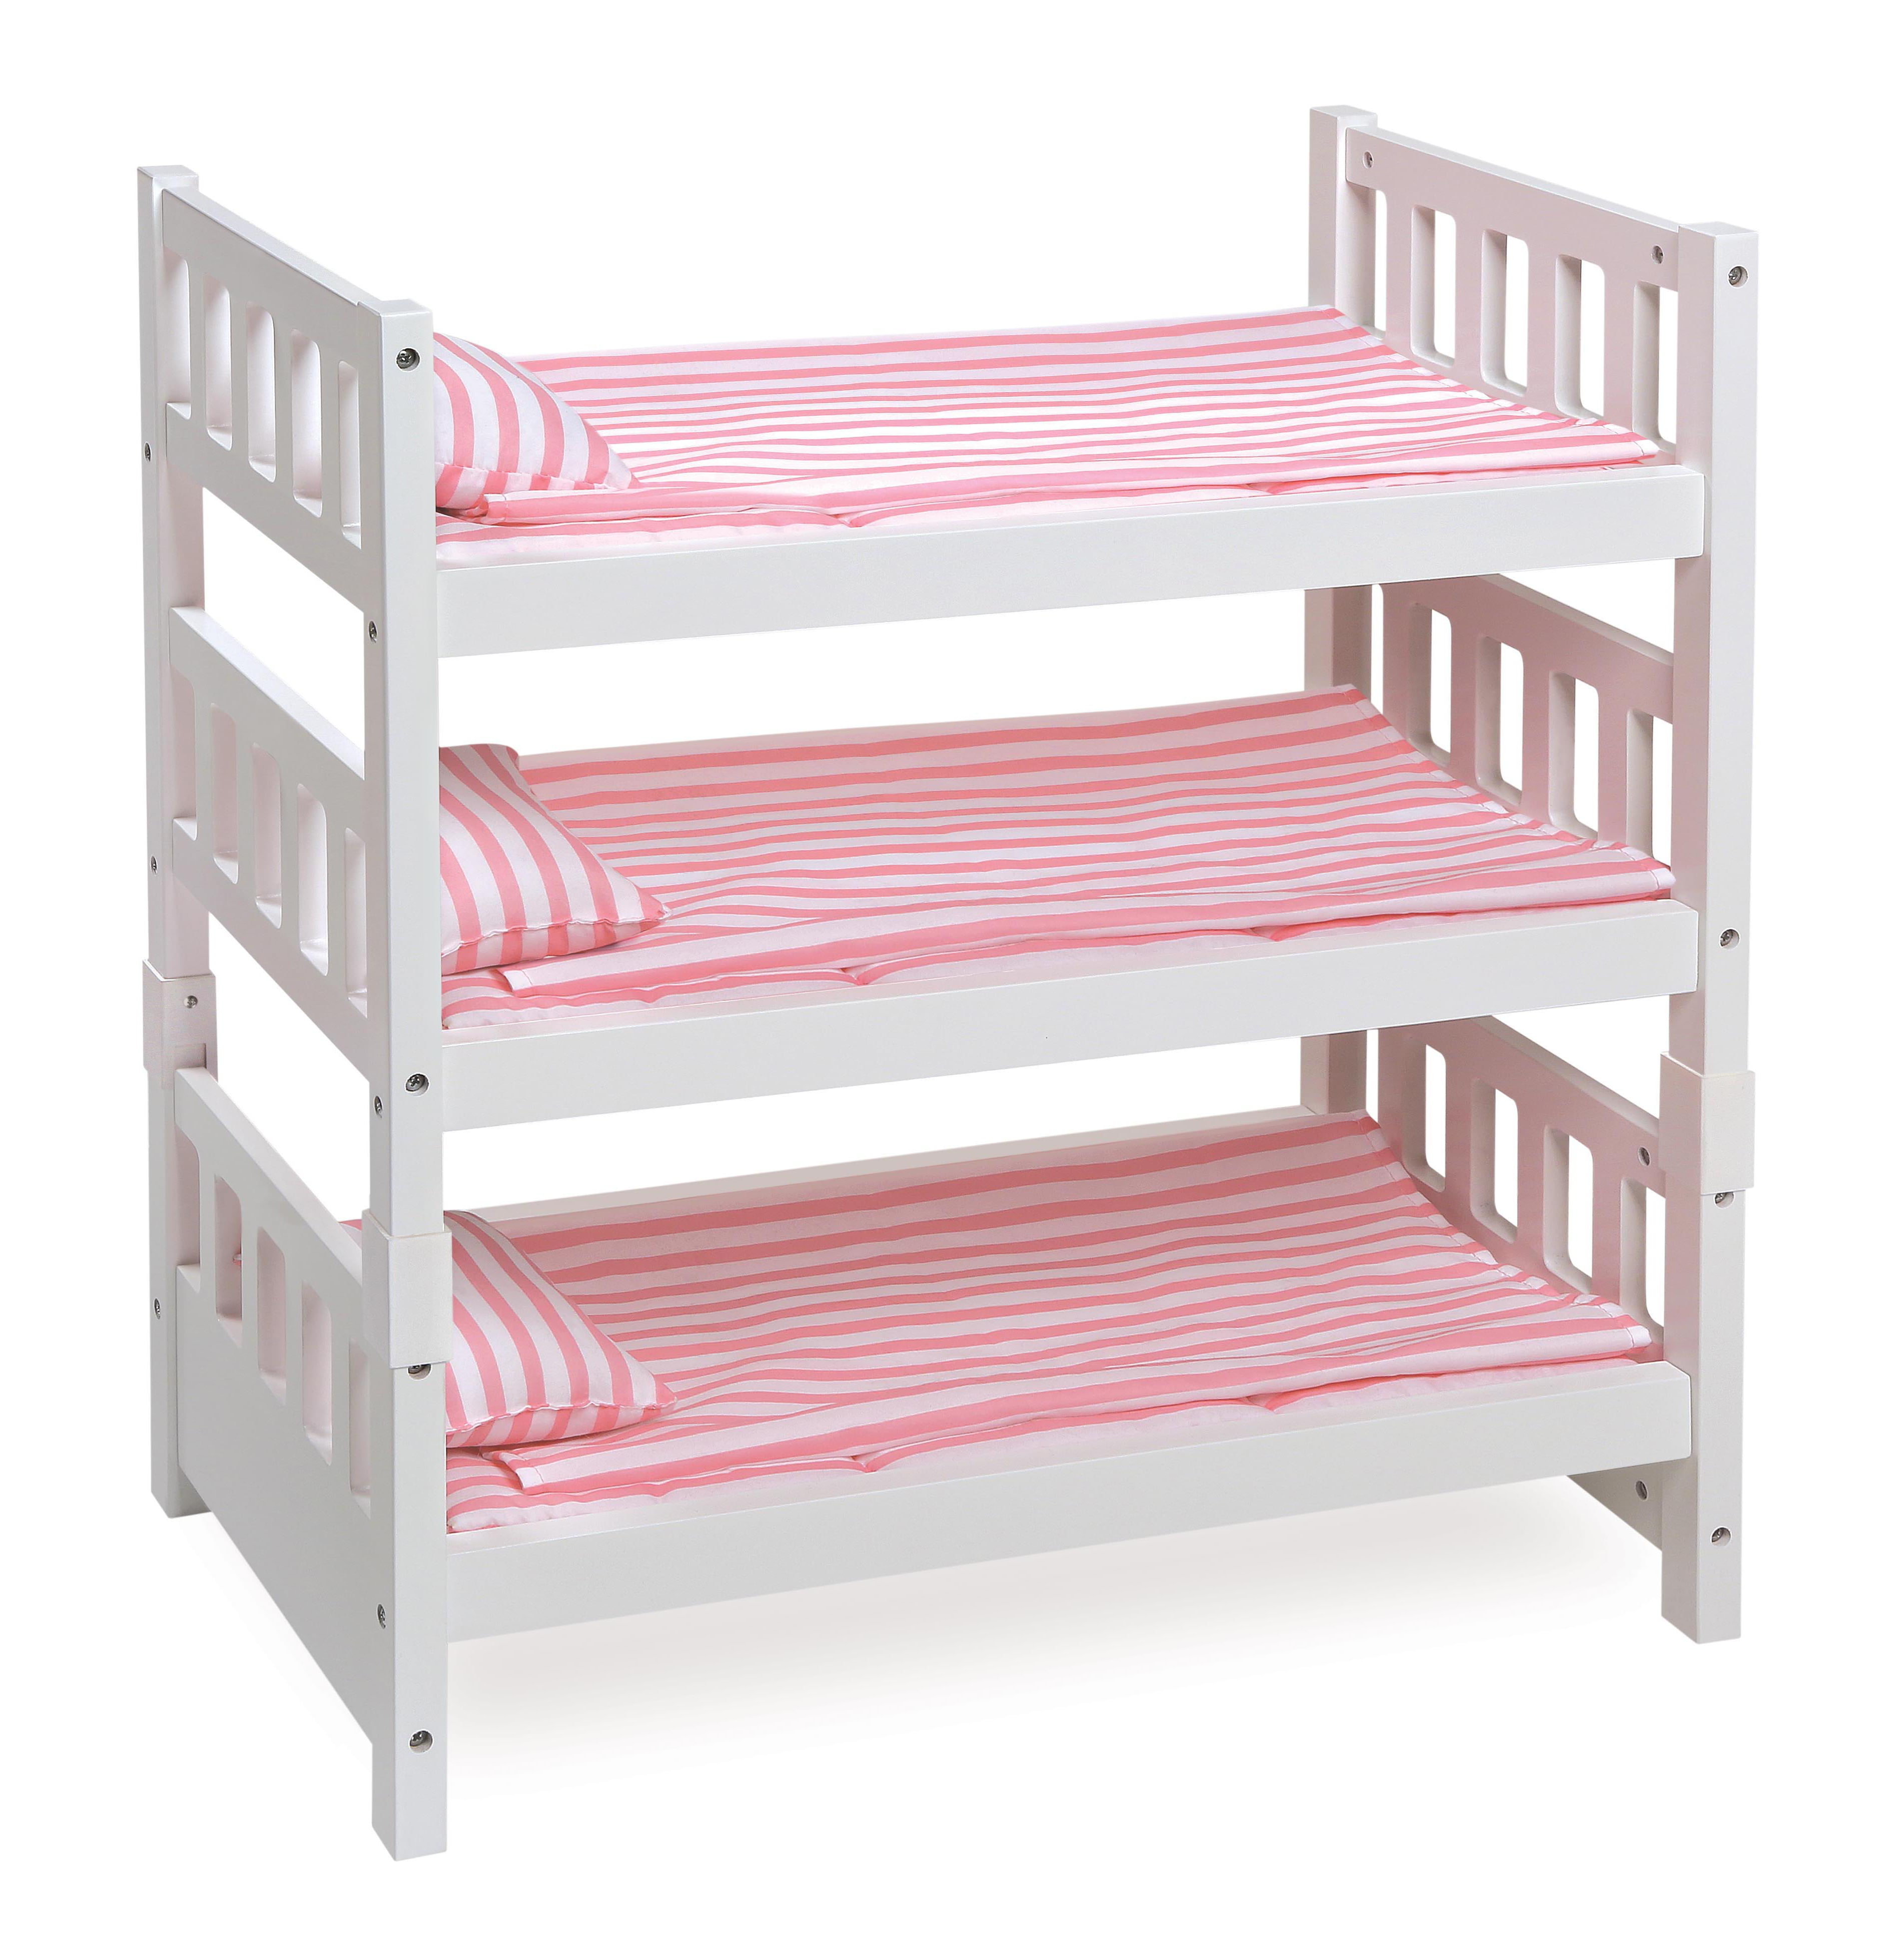 Convertible Doll Bunk Bed, Bedding For American Girl Doll Bunk Beds